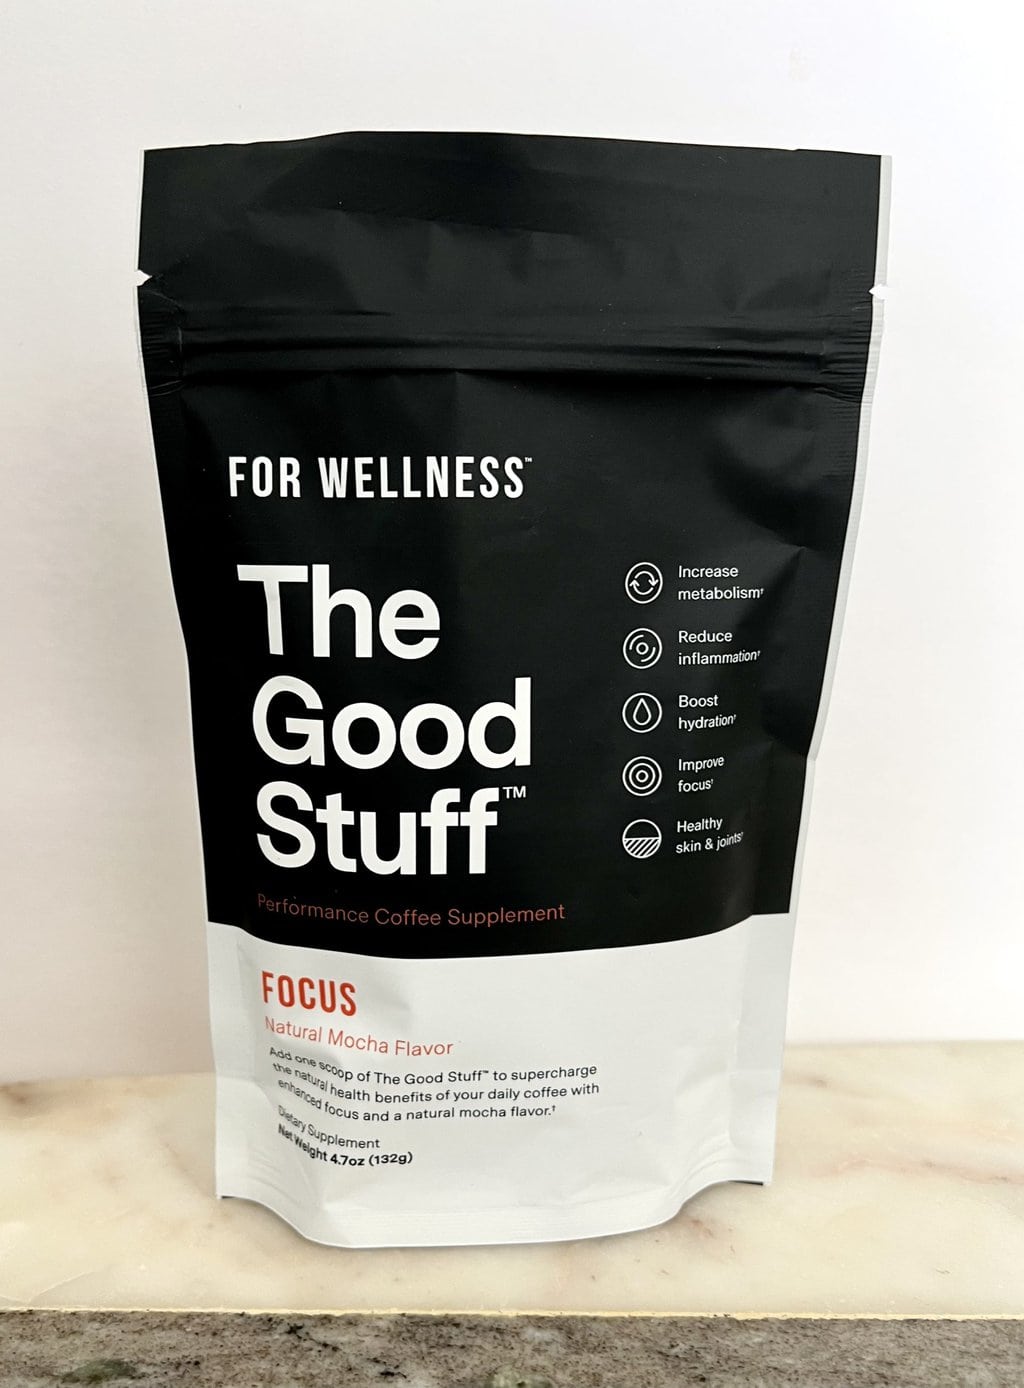 For Wellness The Good Stuff Focus coffee pack